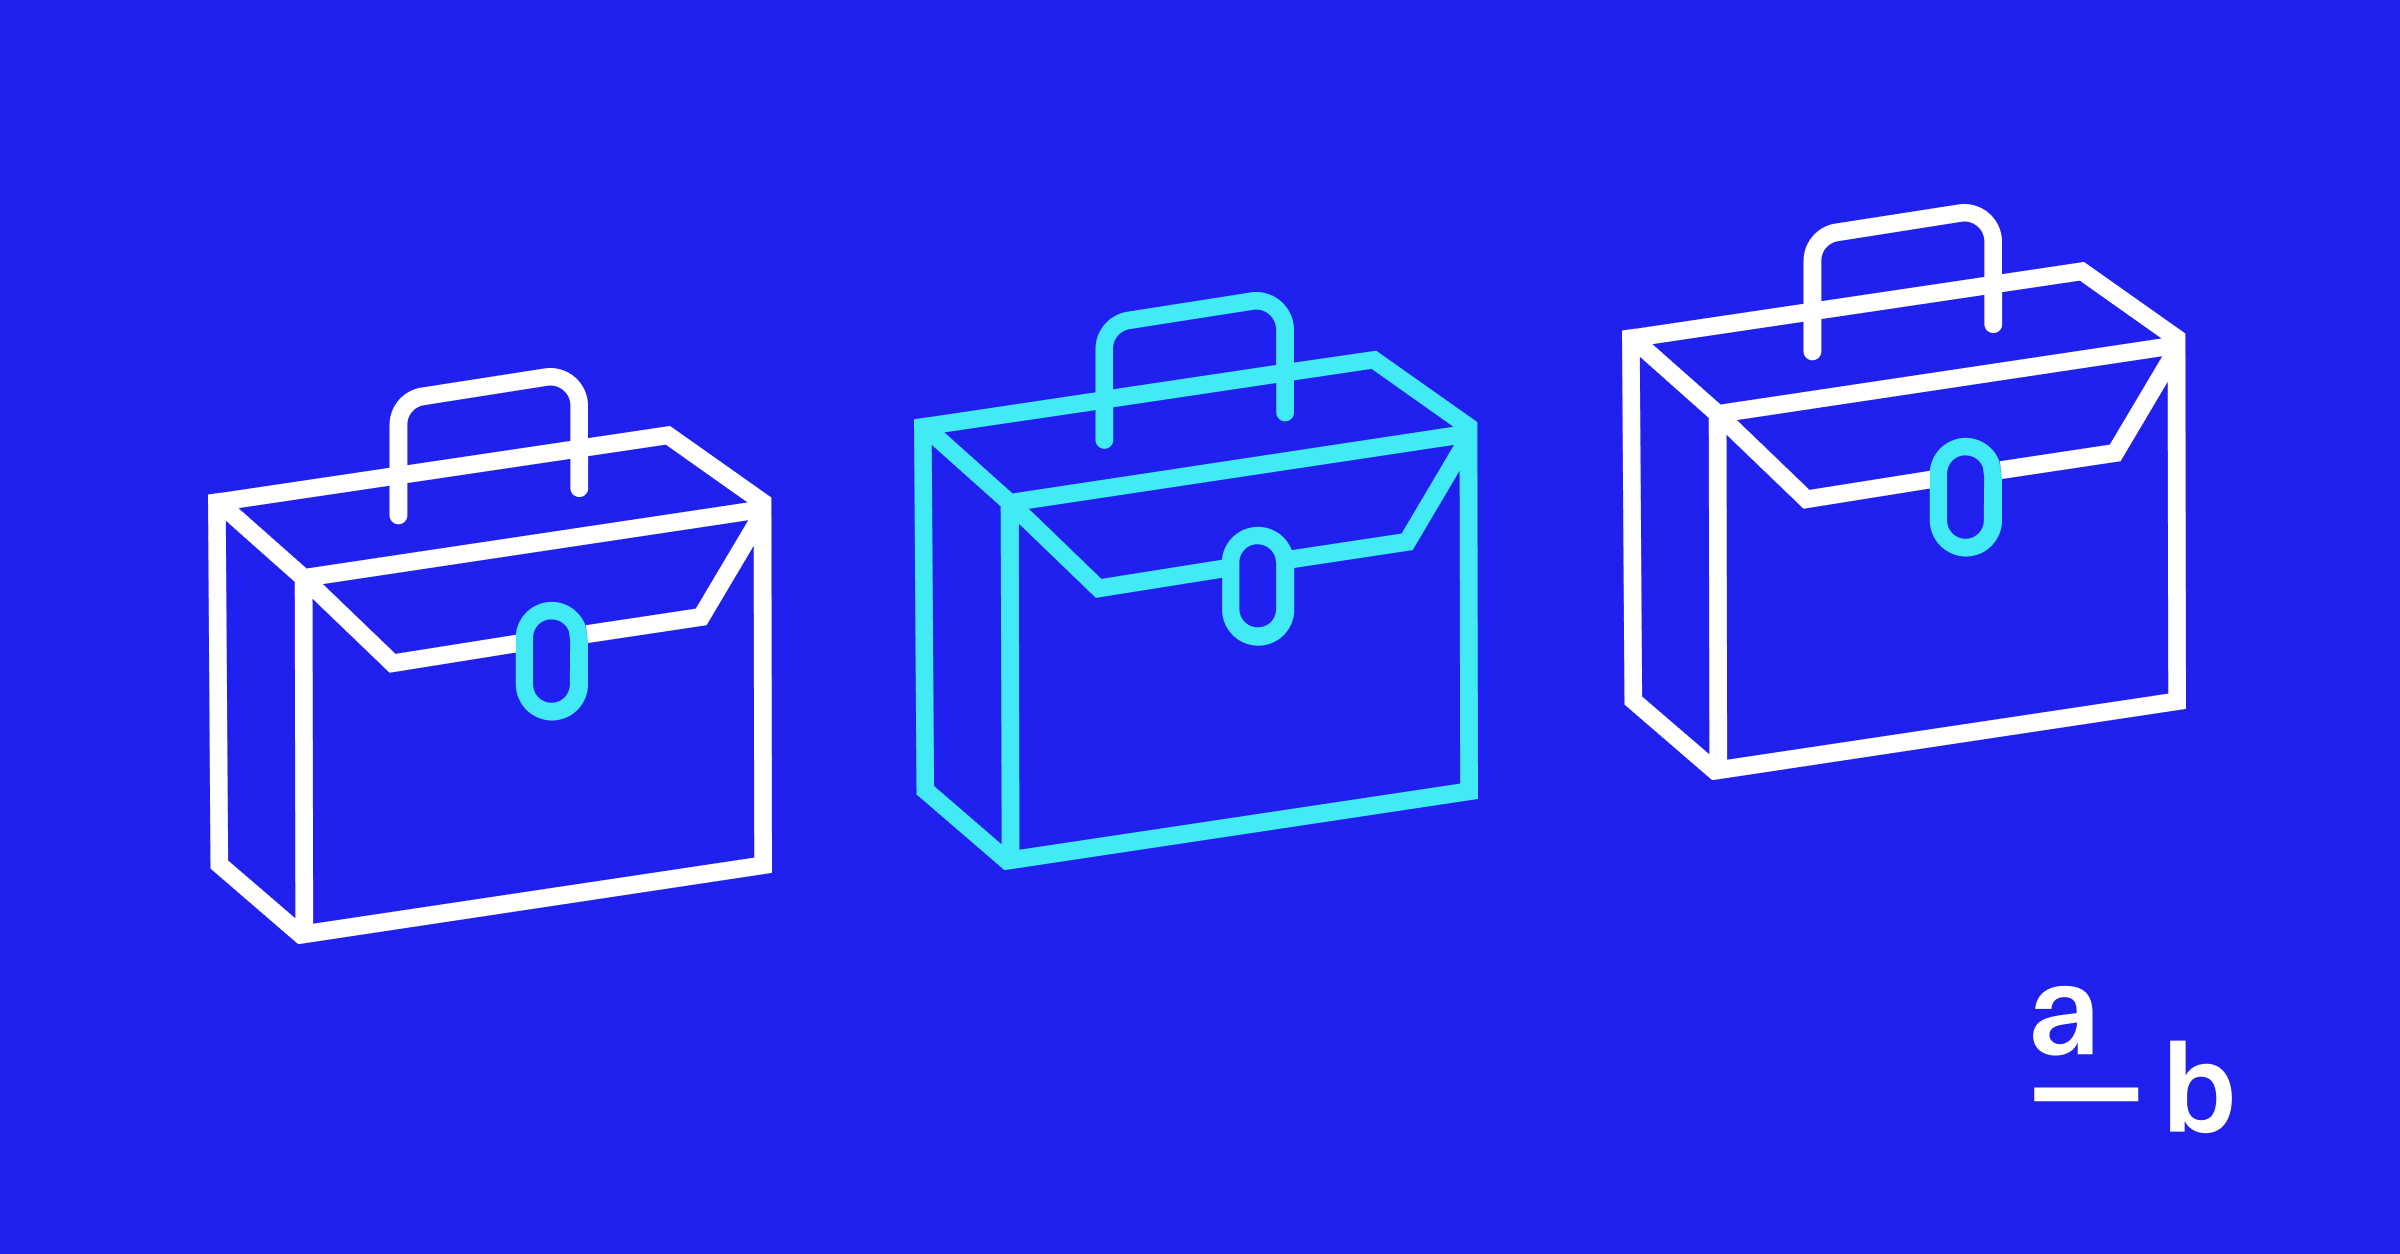 Illustration of 3 briefcase icons on a blue background